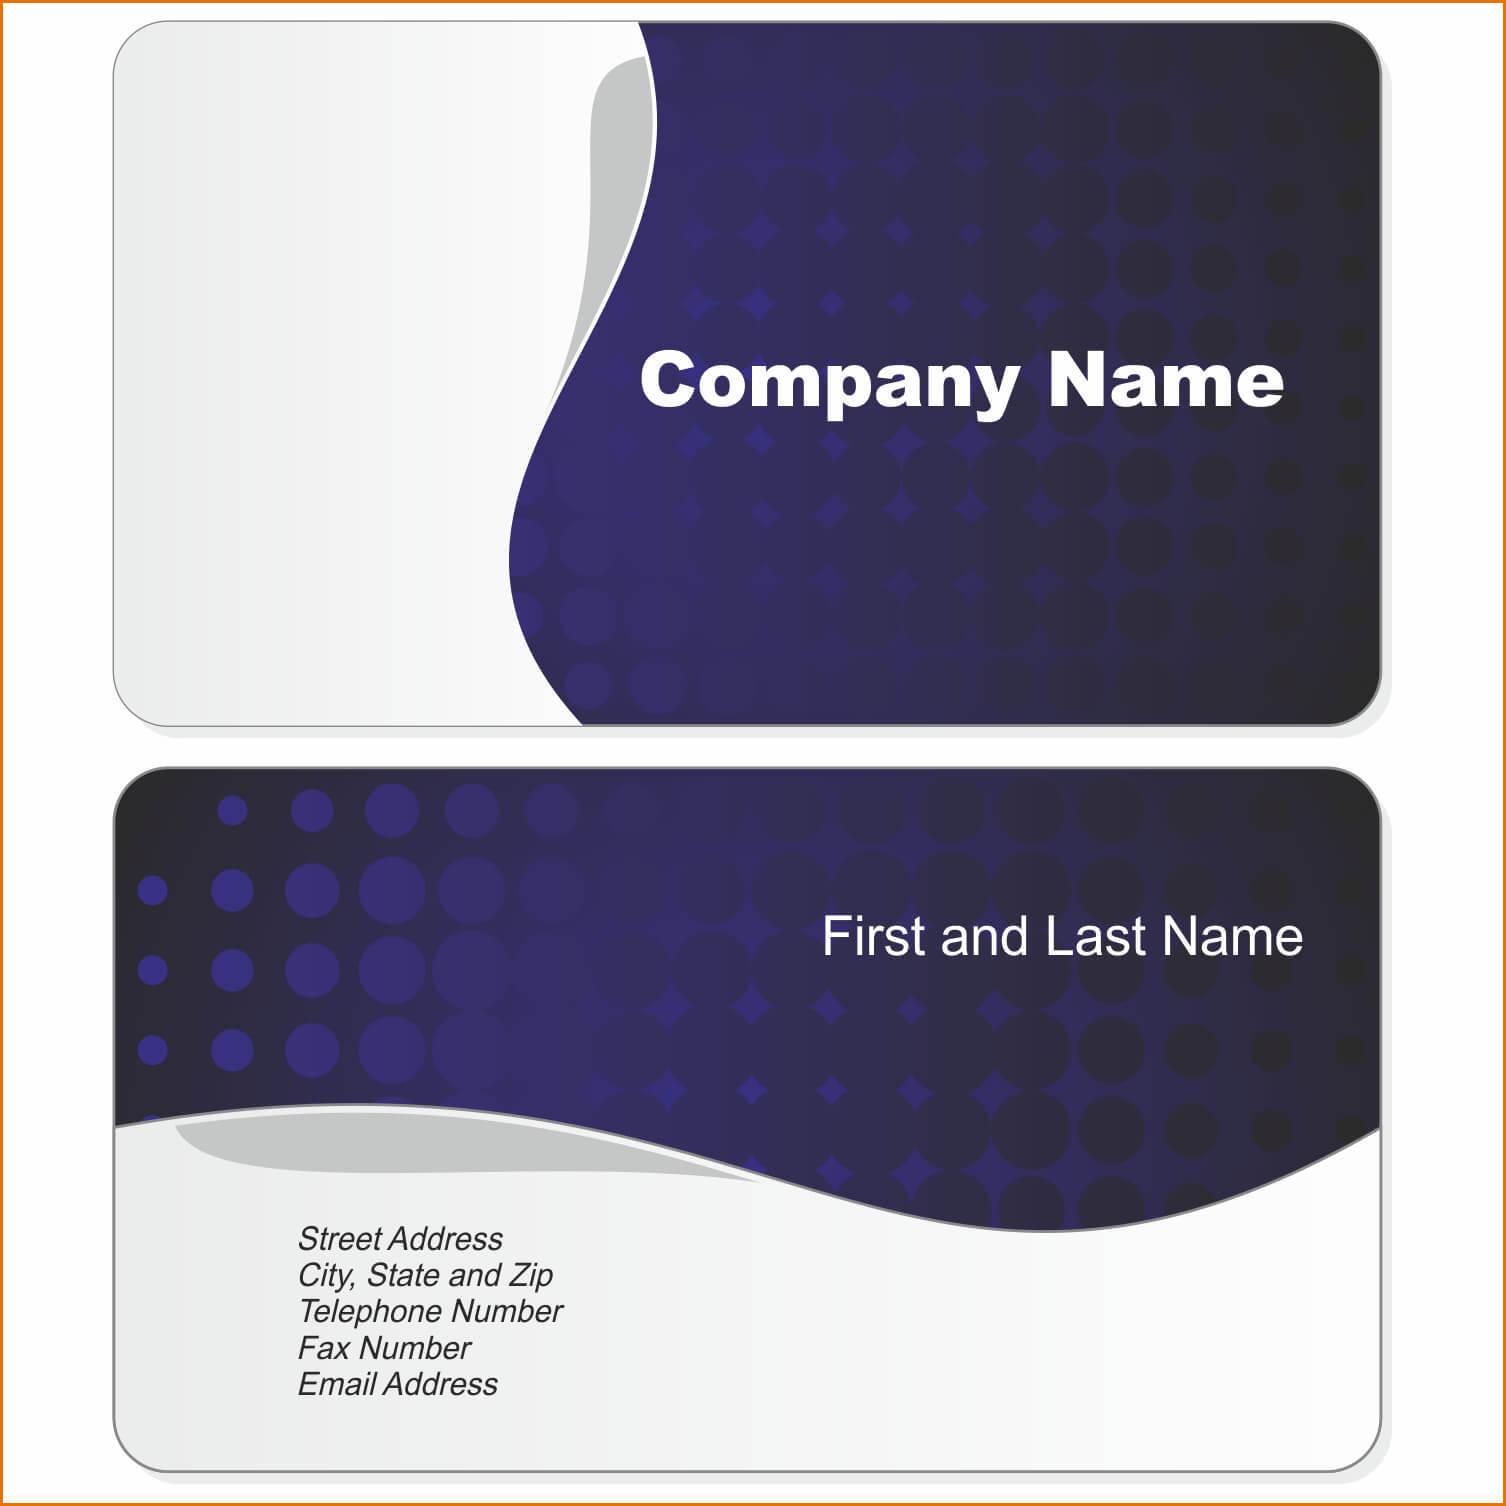 Microsoft Businessard Templates Publisher Free Download Word With Microsoft Templates For Business Cards